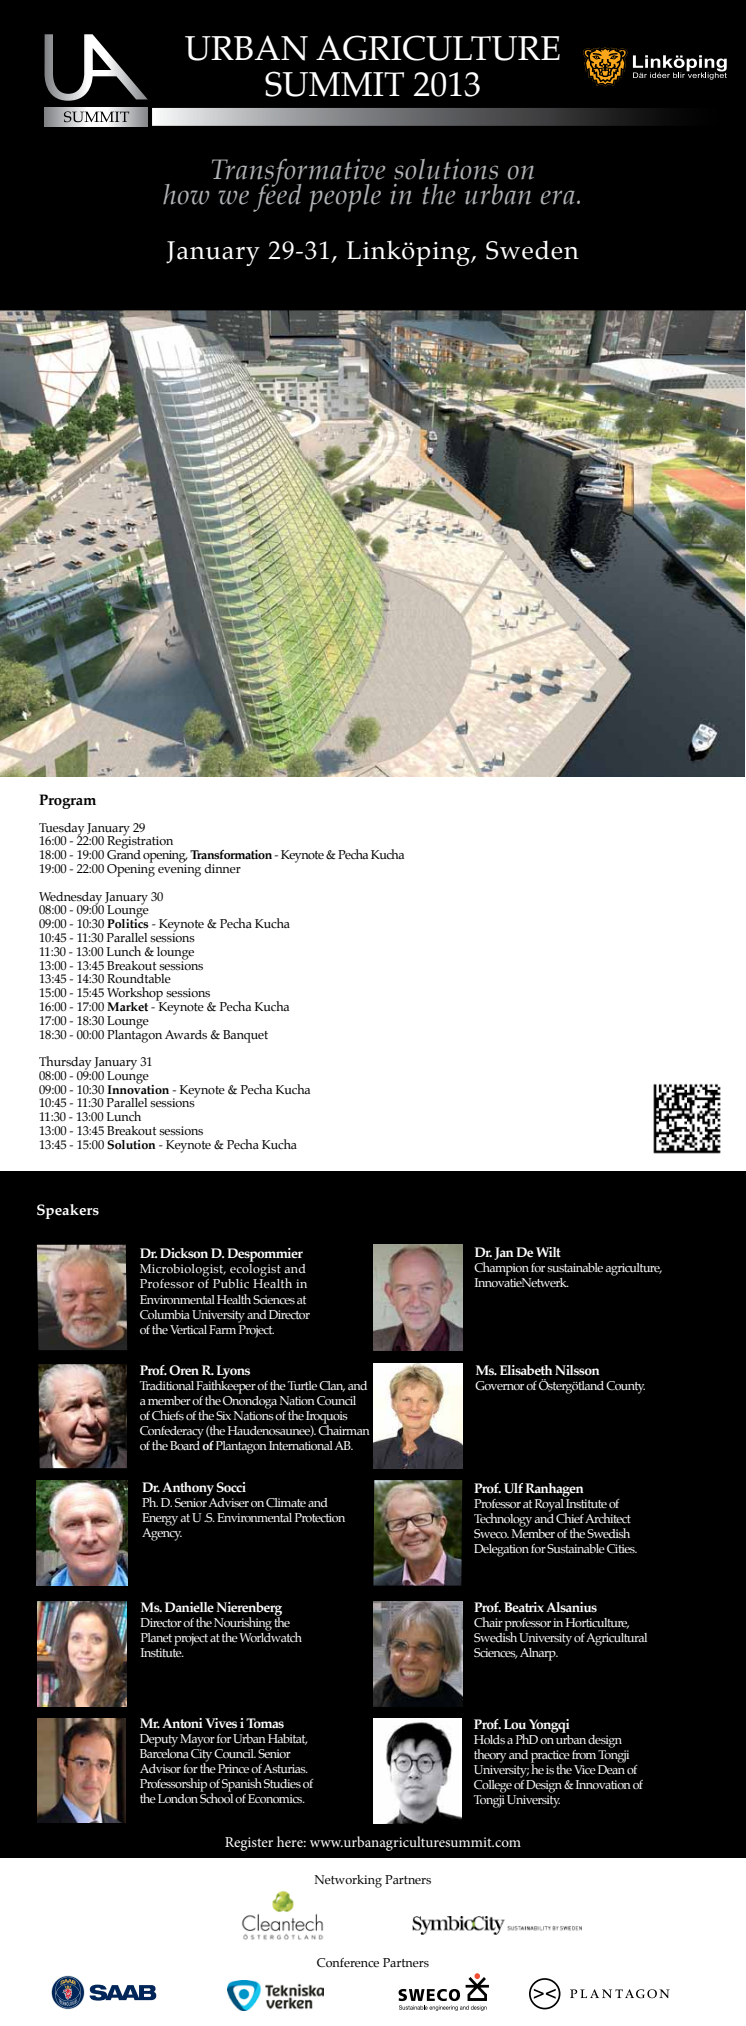 Invitation to The Urban Agriculture Summit 2013 in Linköping